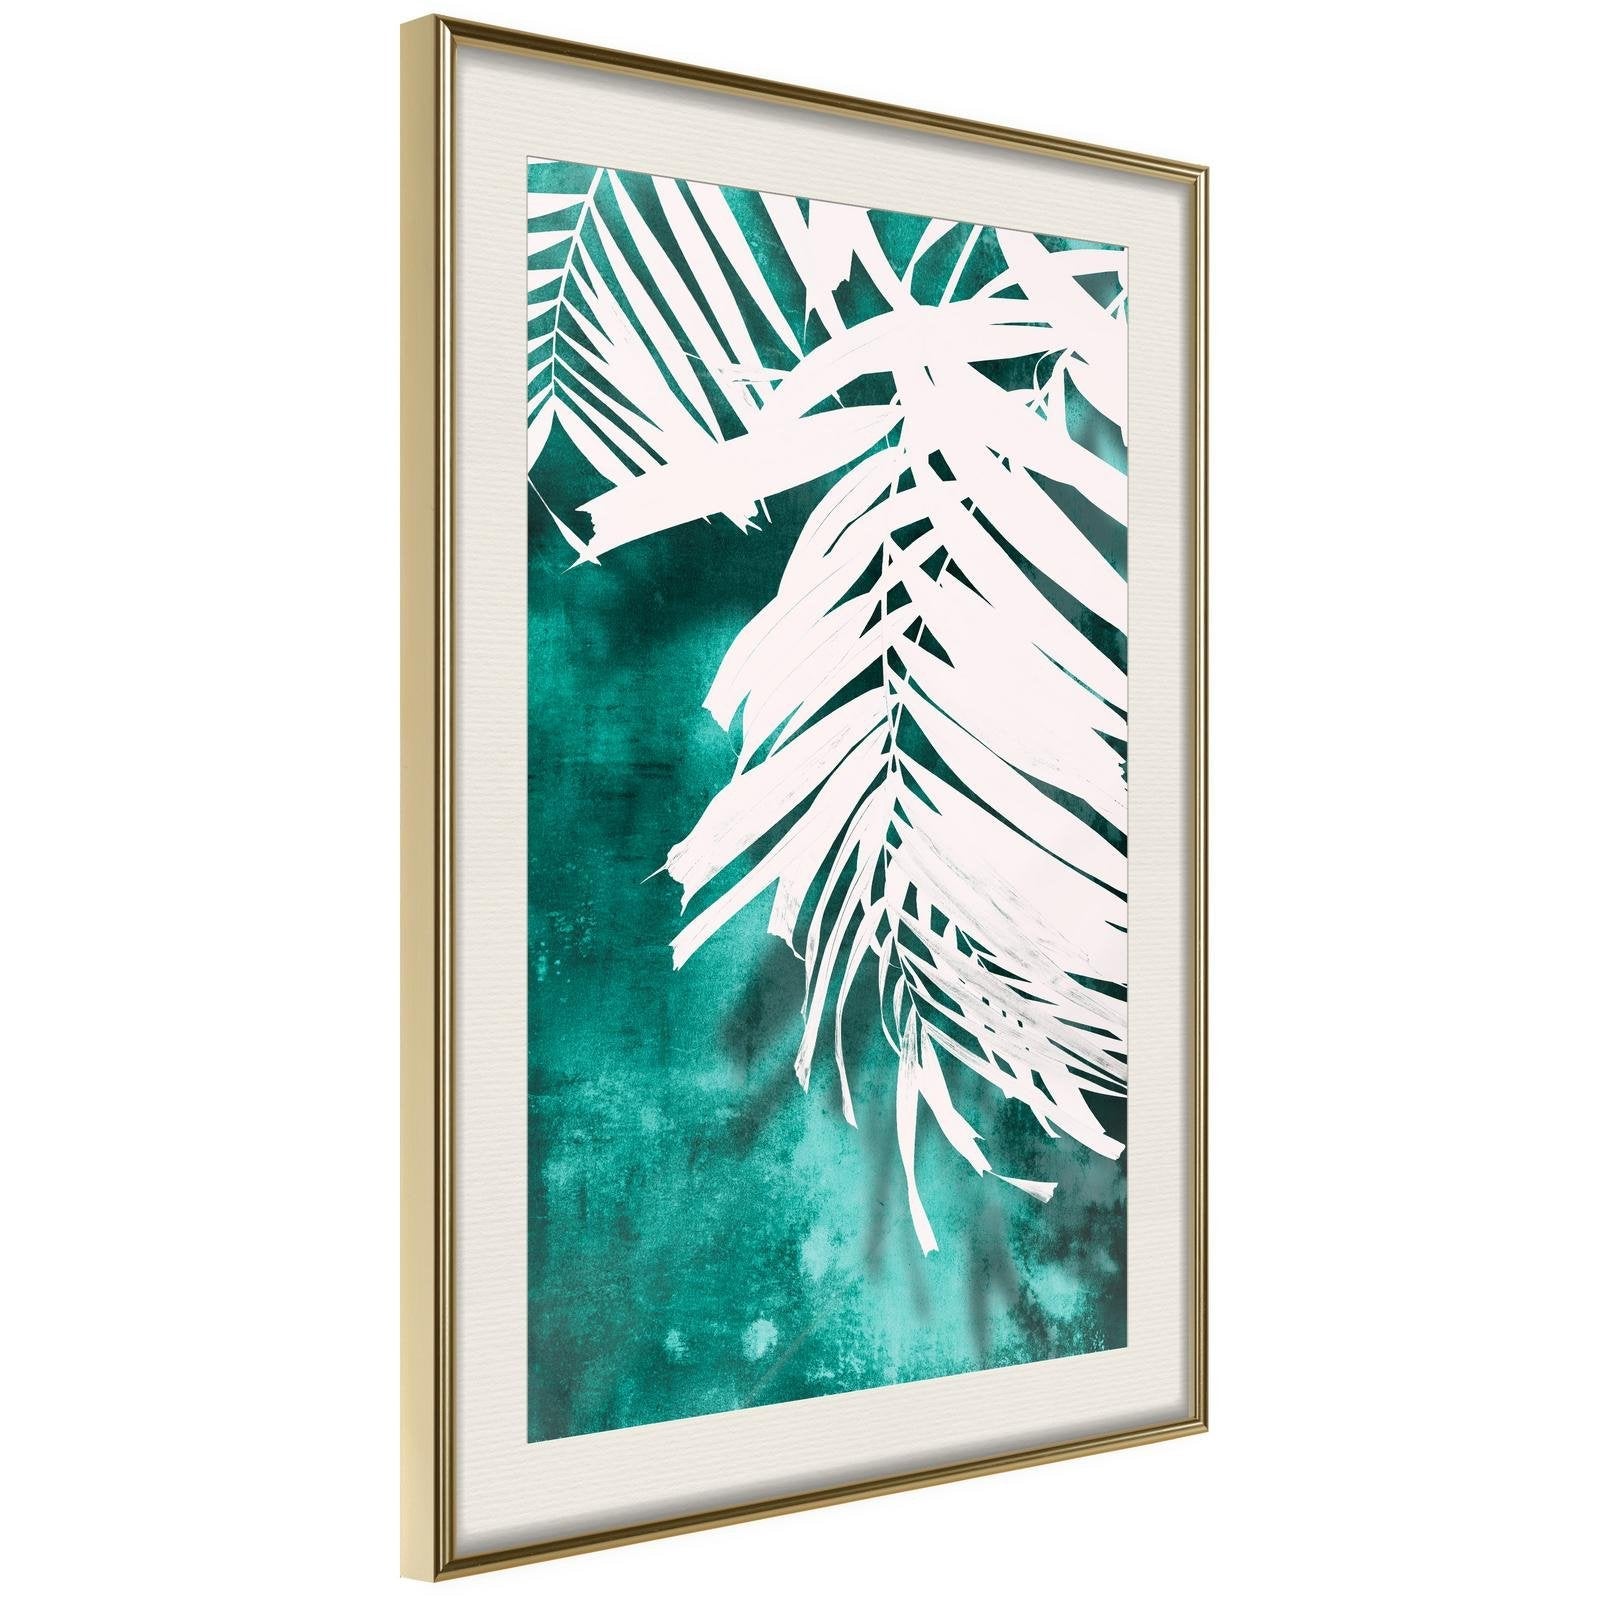 Inramad Poster / Tavla - White Palm on Teal Background-Poster Inramad-Artgeist-20x30-Guldram med passepartout-peaceofhome.se